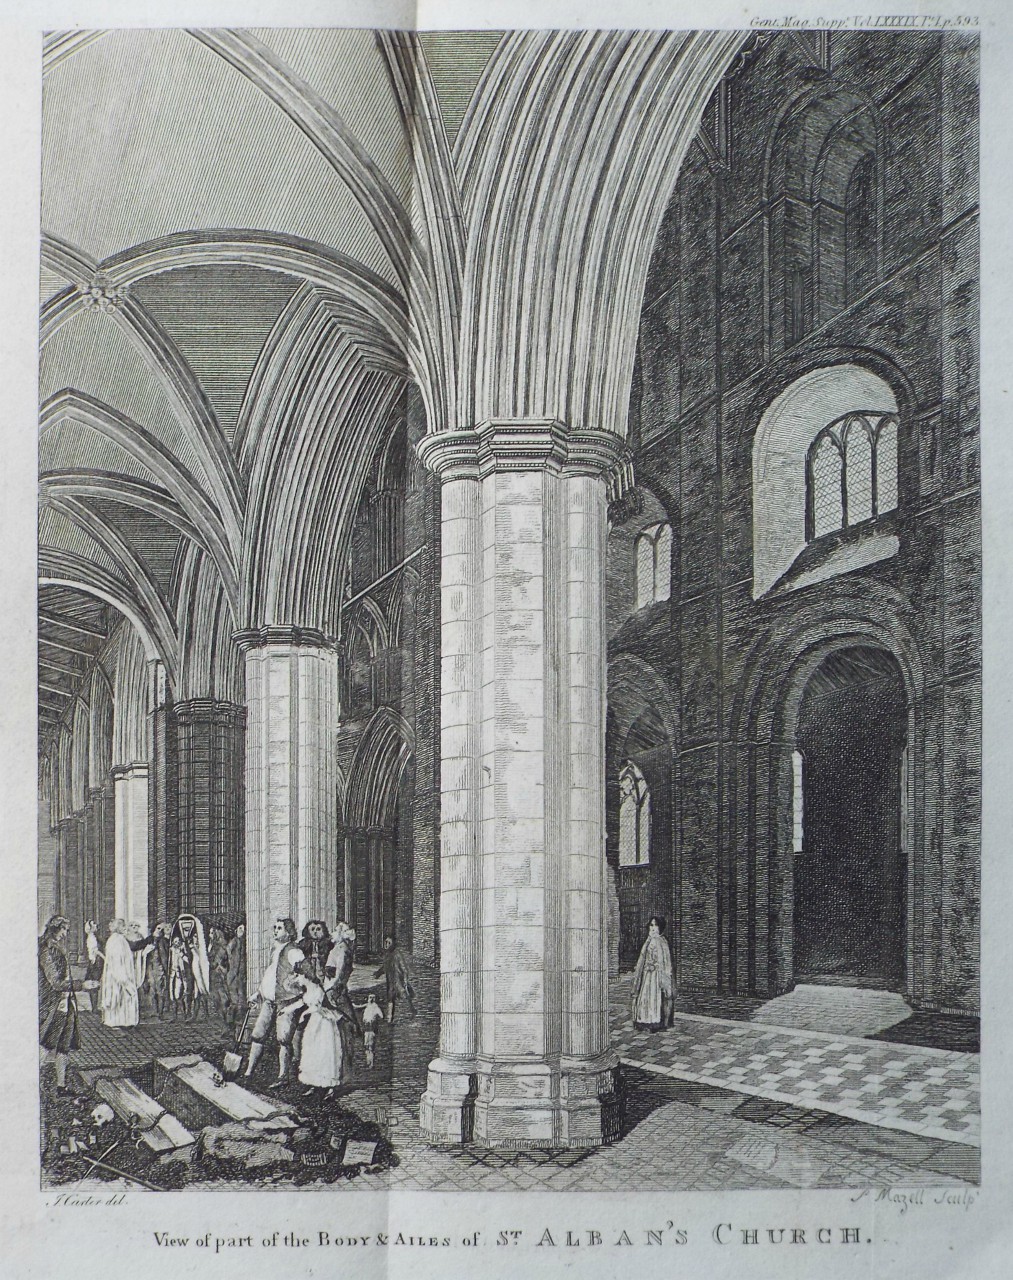 Print - View of part of the Body & Aisles of St. Alban's Church. - Mazell